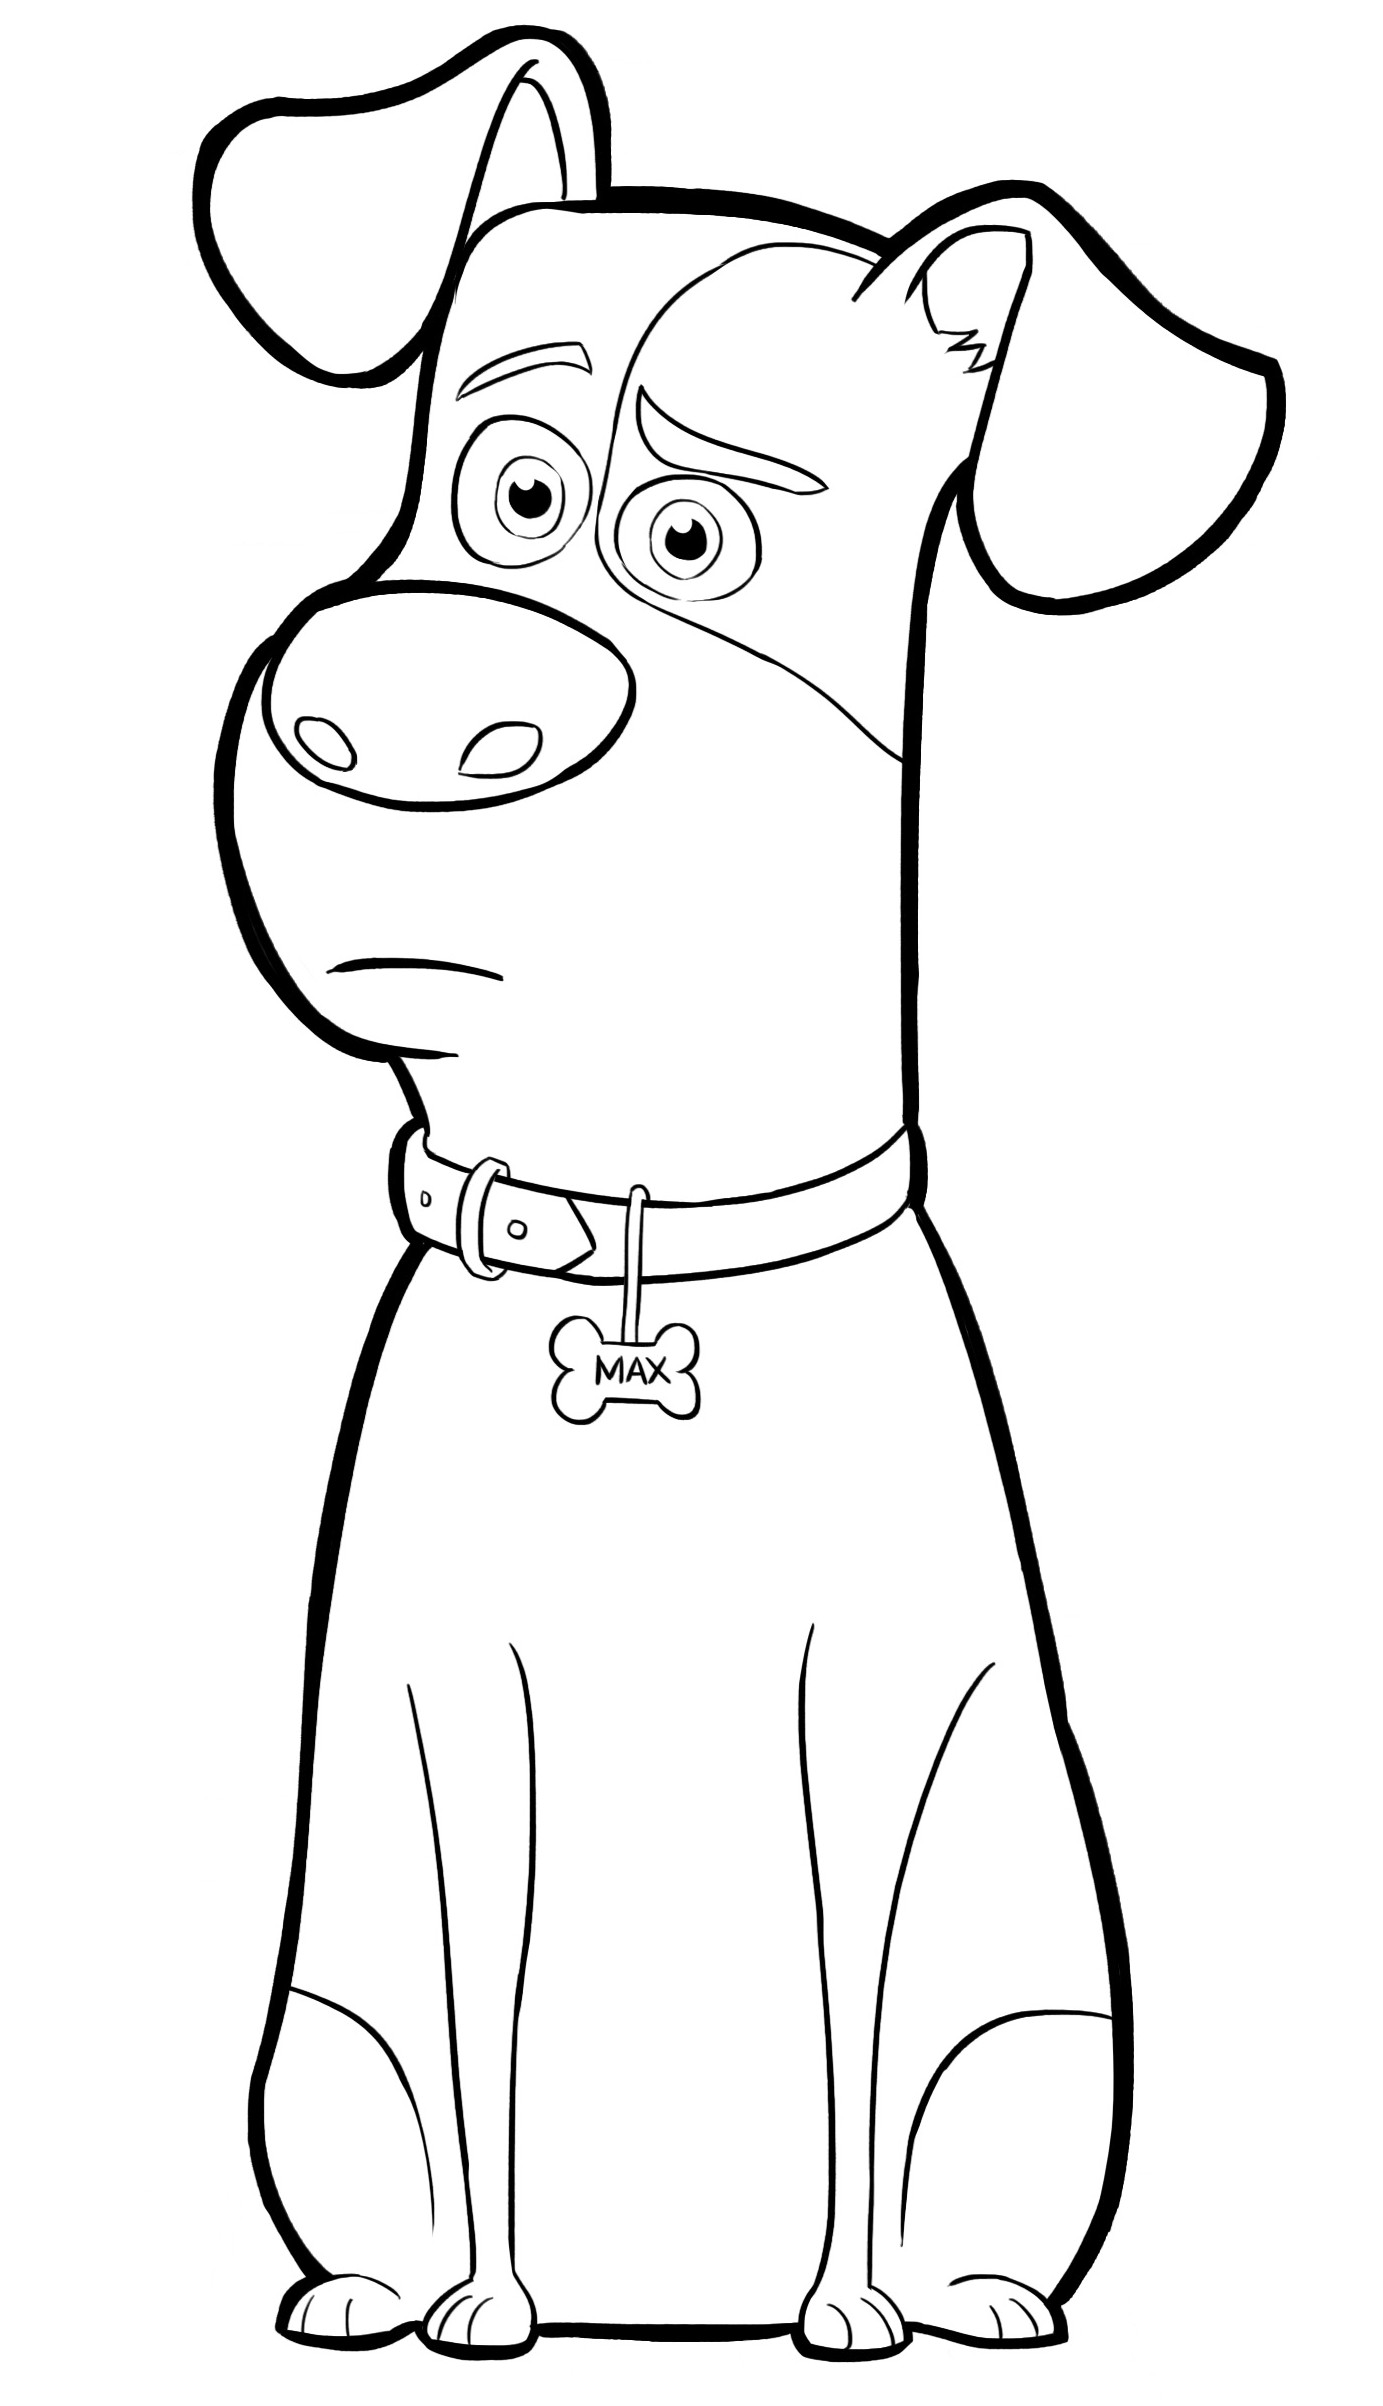 Coloring Pages For Kids Printables
 Pets Coloring Pages Best Coloring Pages For Kids